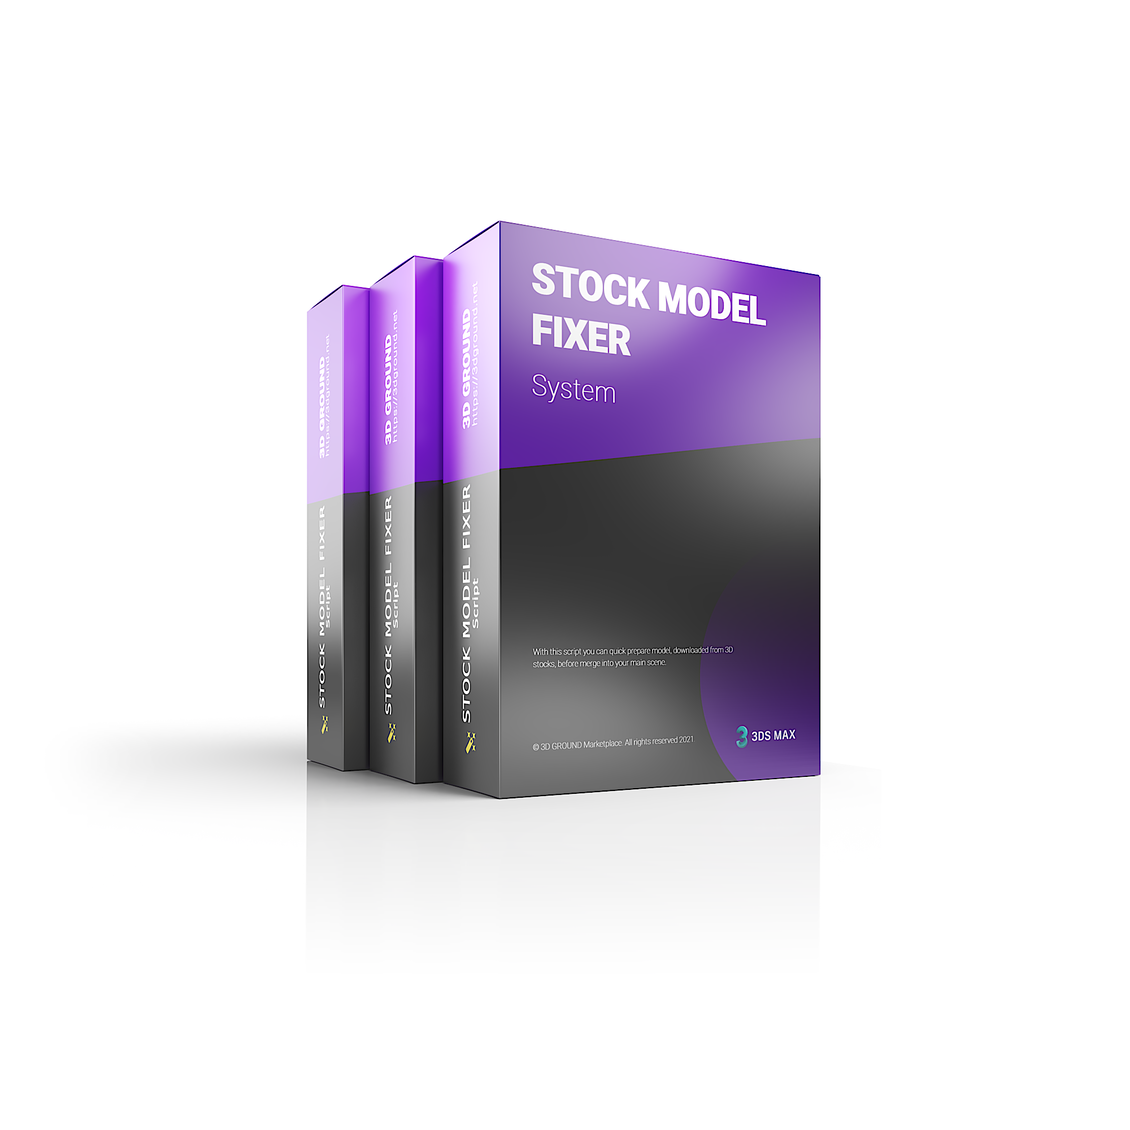 Stock Model Fixer  With this script you can quick prepare model, downloaded from 3D stocks, before merge into your main scene.

Stock Model Fixer is indispensable when using models from 3ddd/3dsky, cgtrader, hotpies and other resources.
